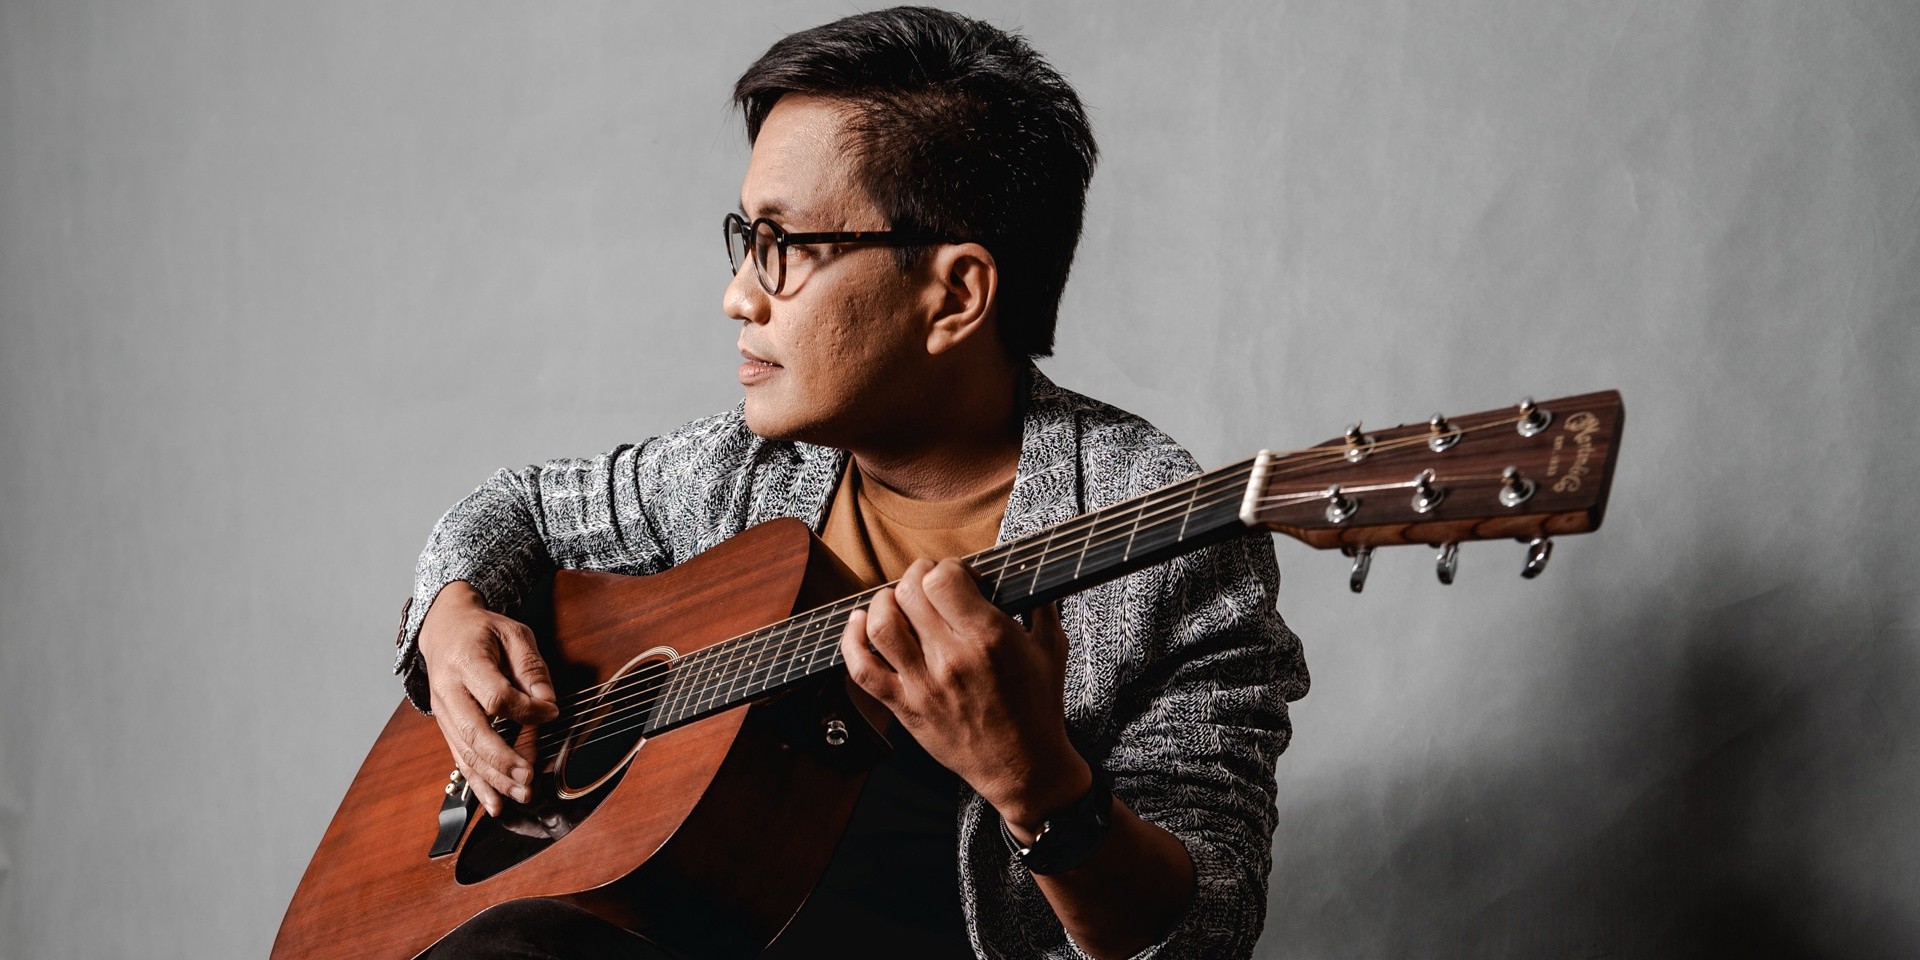 Ebe Dancel questions the stretches of love with new single 'Hanggang Kailan Kita Mahihintay' – watch